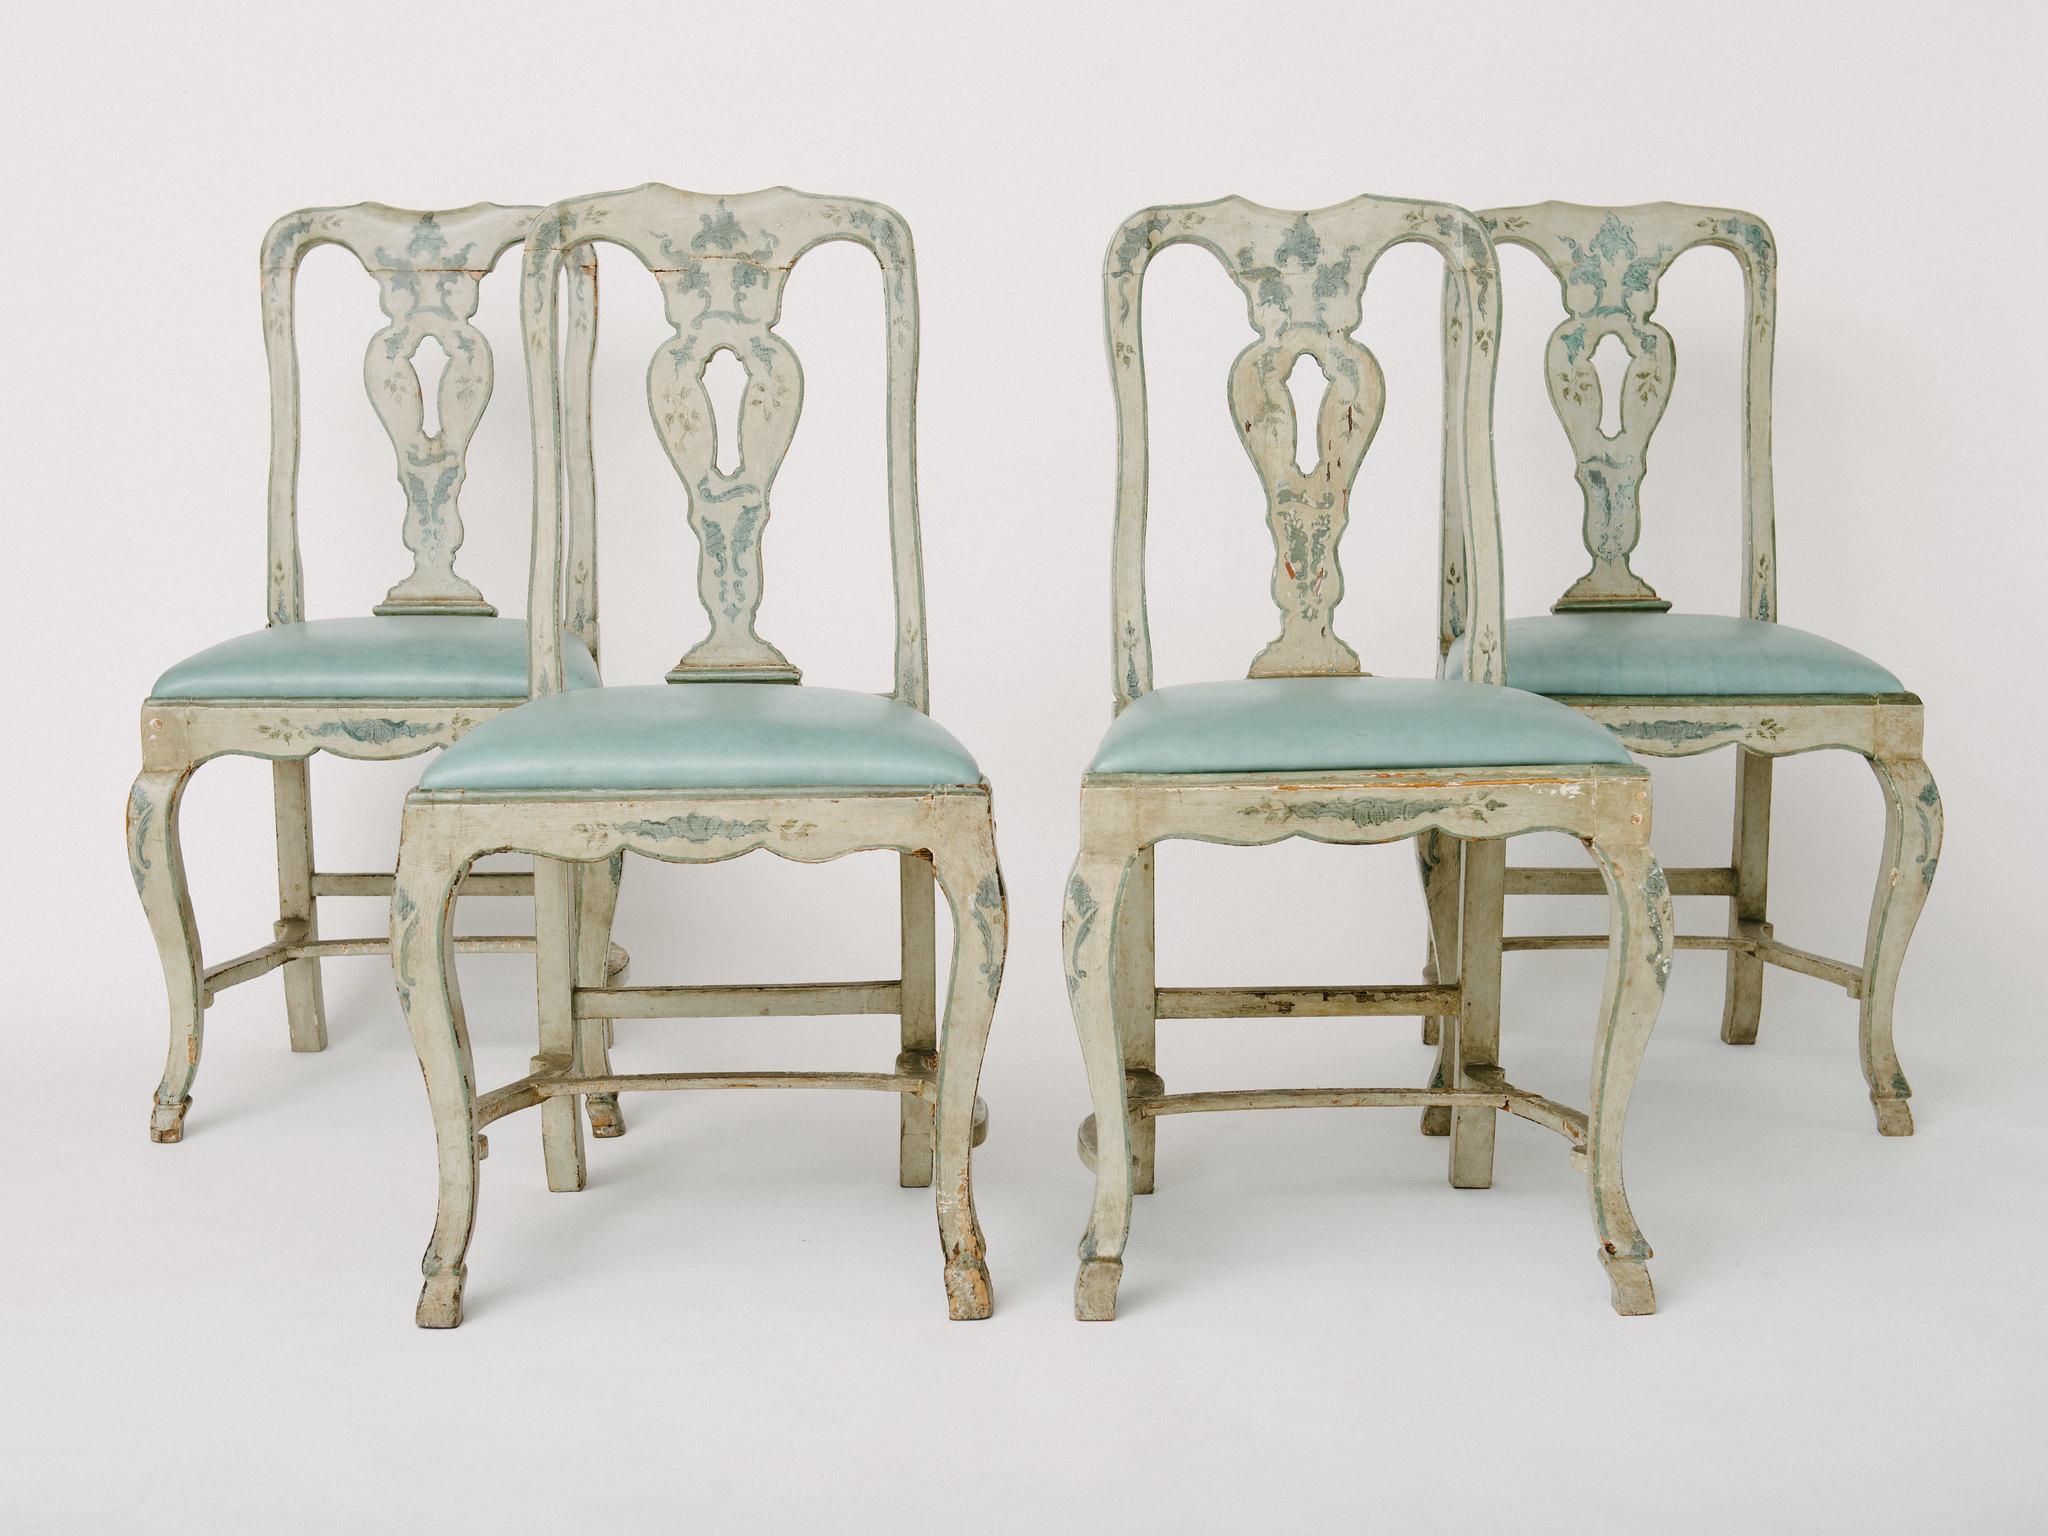 18th century blue-gray painted Venetian side chairs with leather seats. Chairs have a heraldic style cross maker's mark engraved on backs of chairs. Features hand carved stretchers and pied-de-biche hooves, seat covered in a sky blue leather. Uneven